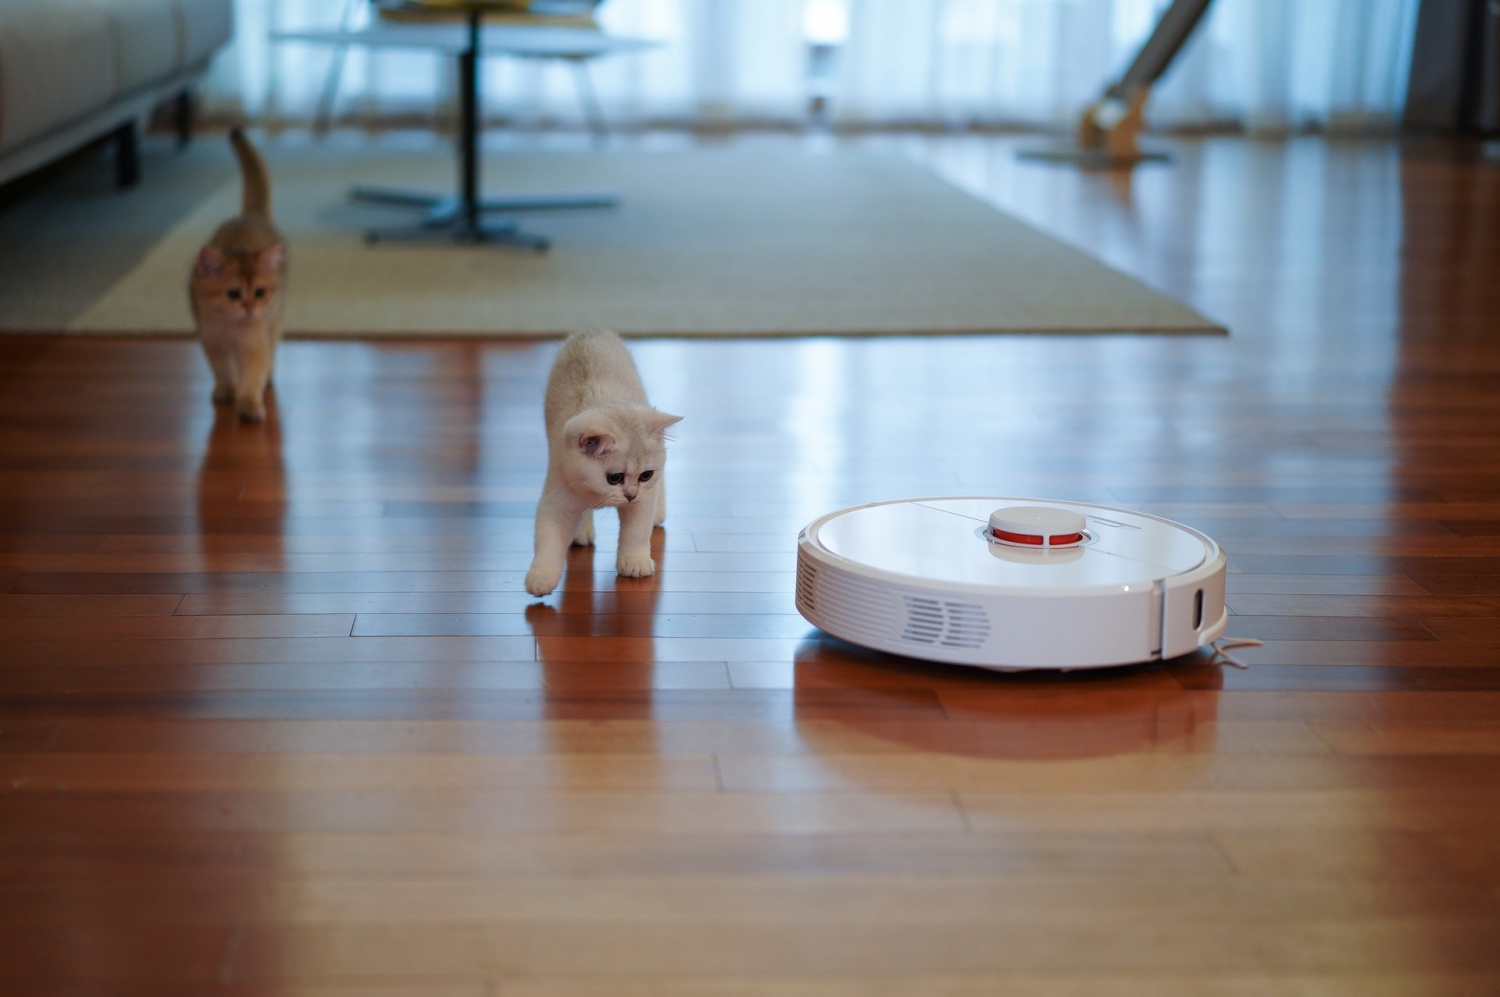 Should You Buy a Cordless Vacuum or a Robot Vacuum? Here Are the Pros and Cons